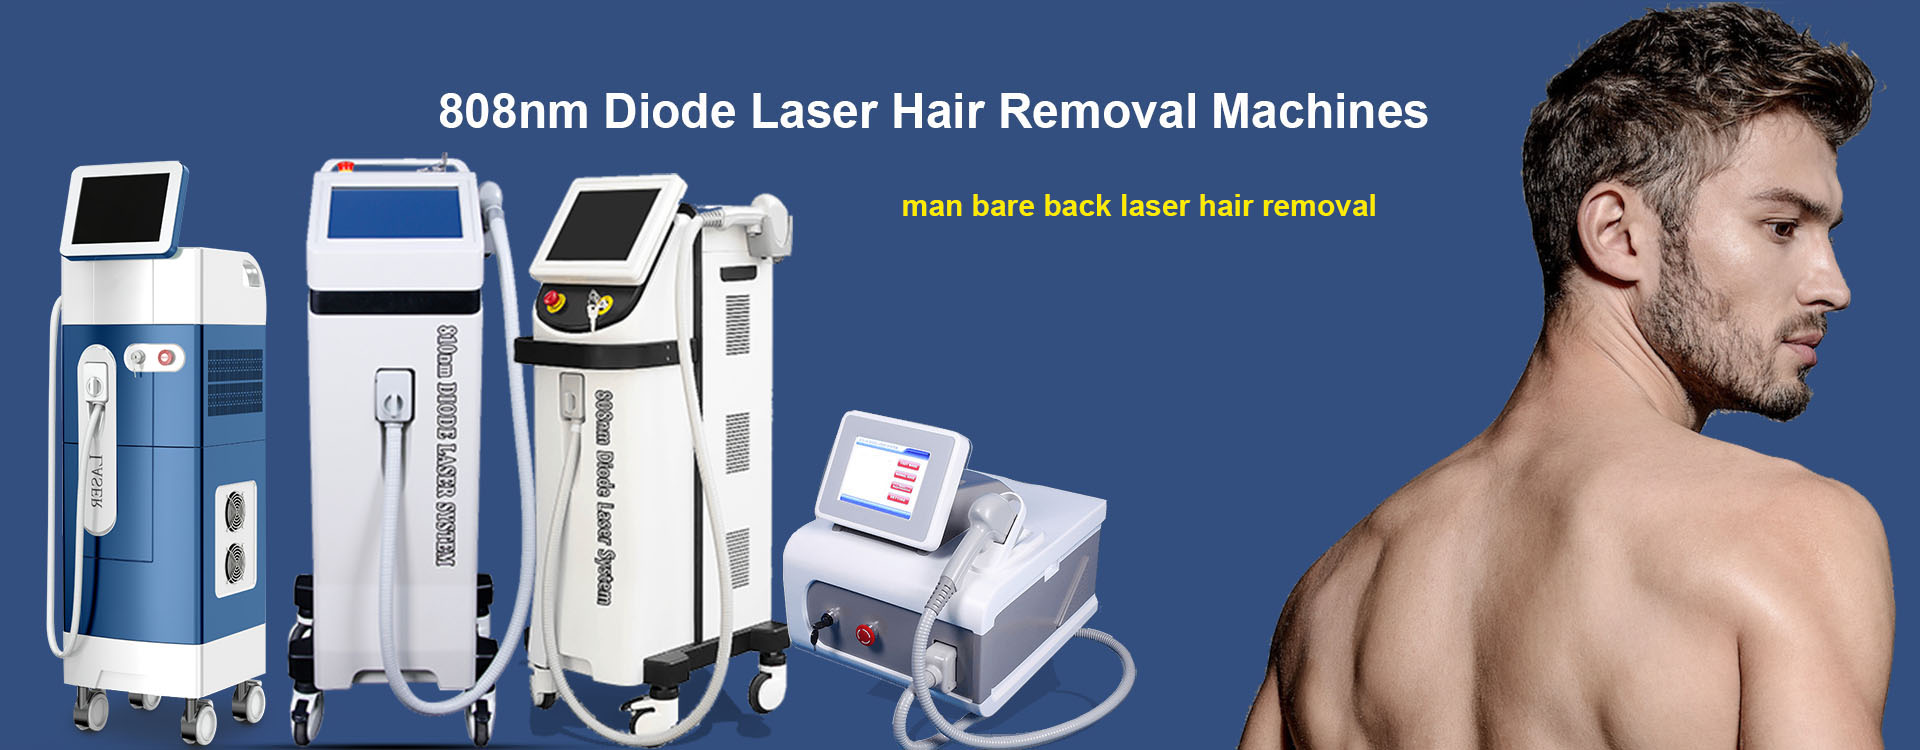 808nm diode laser hair removal machines for sale